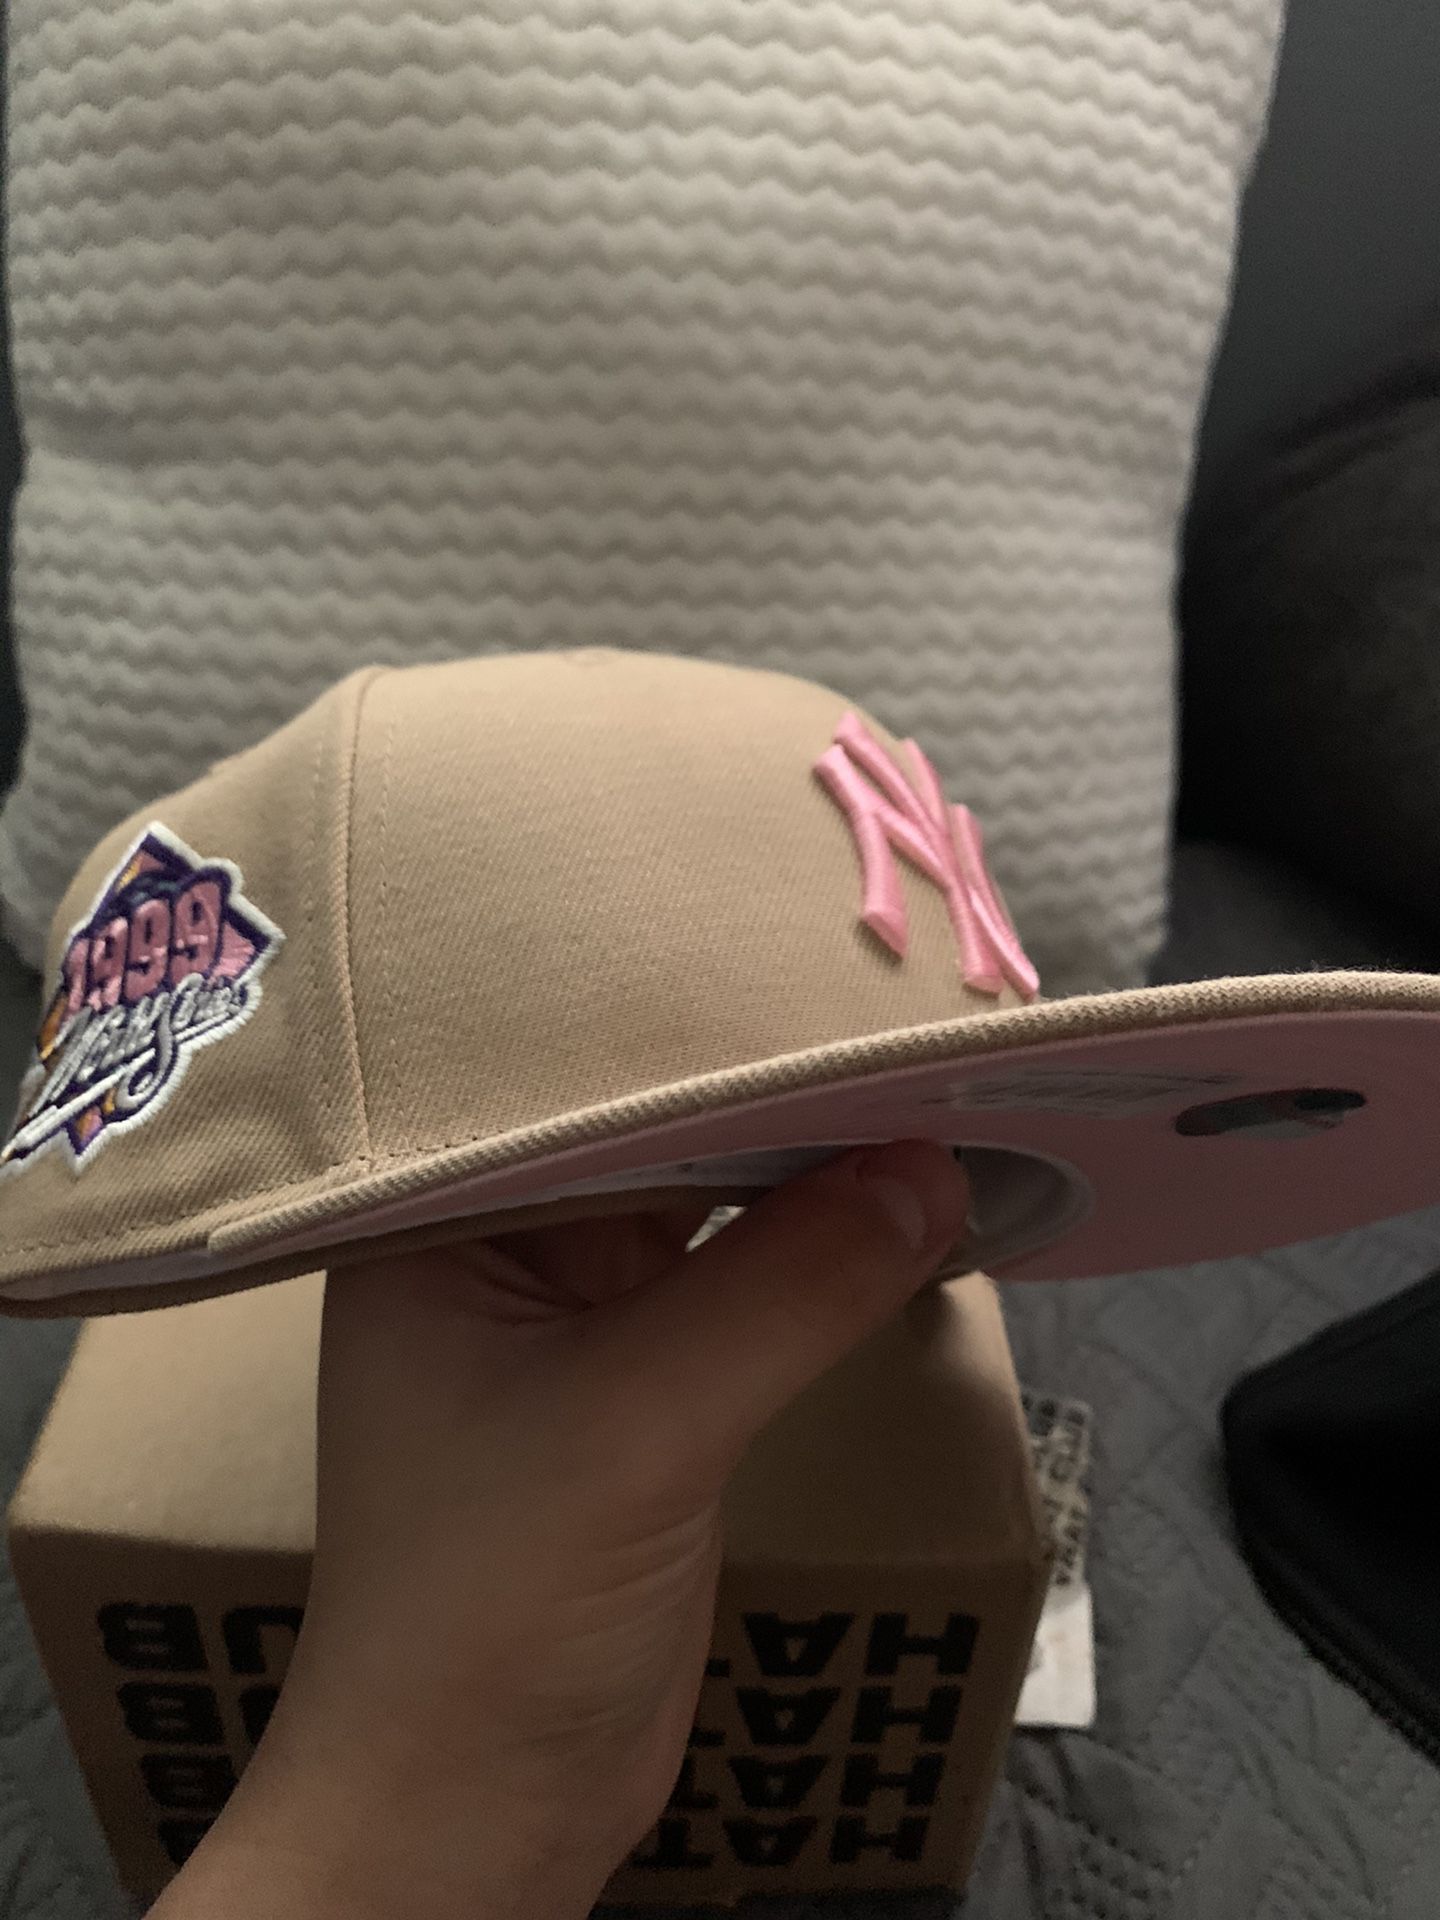 Two-Tone Birmingham Barons Southern League Baseball Side Patch M3 Under  Brim Fitted Cap 7 1/4 for Sale in Anaheim, CA - OfferUp